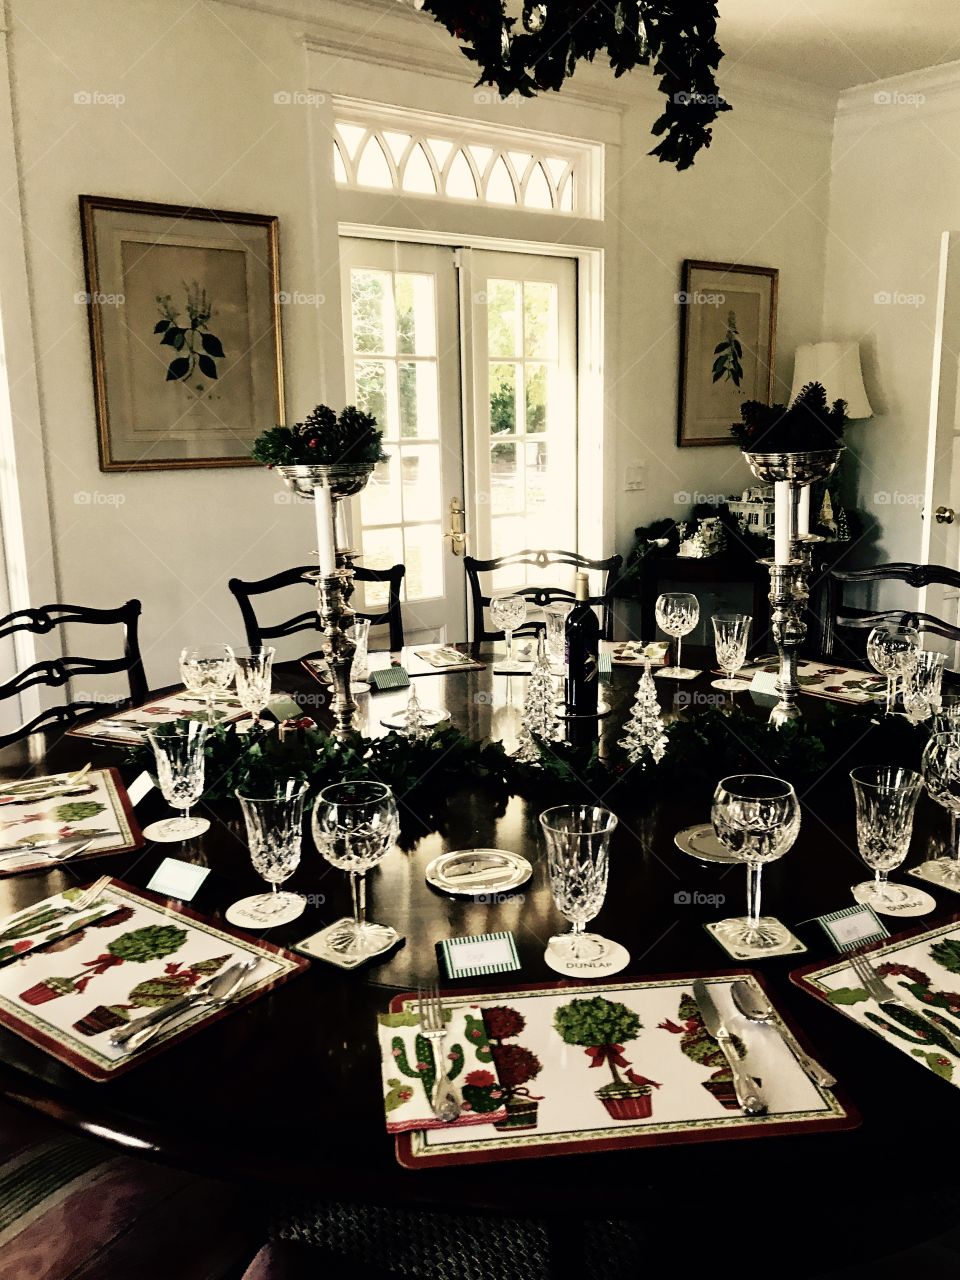 Setting the table for the holidays